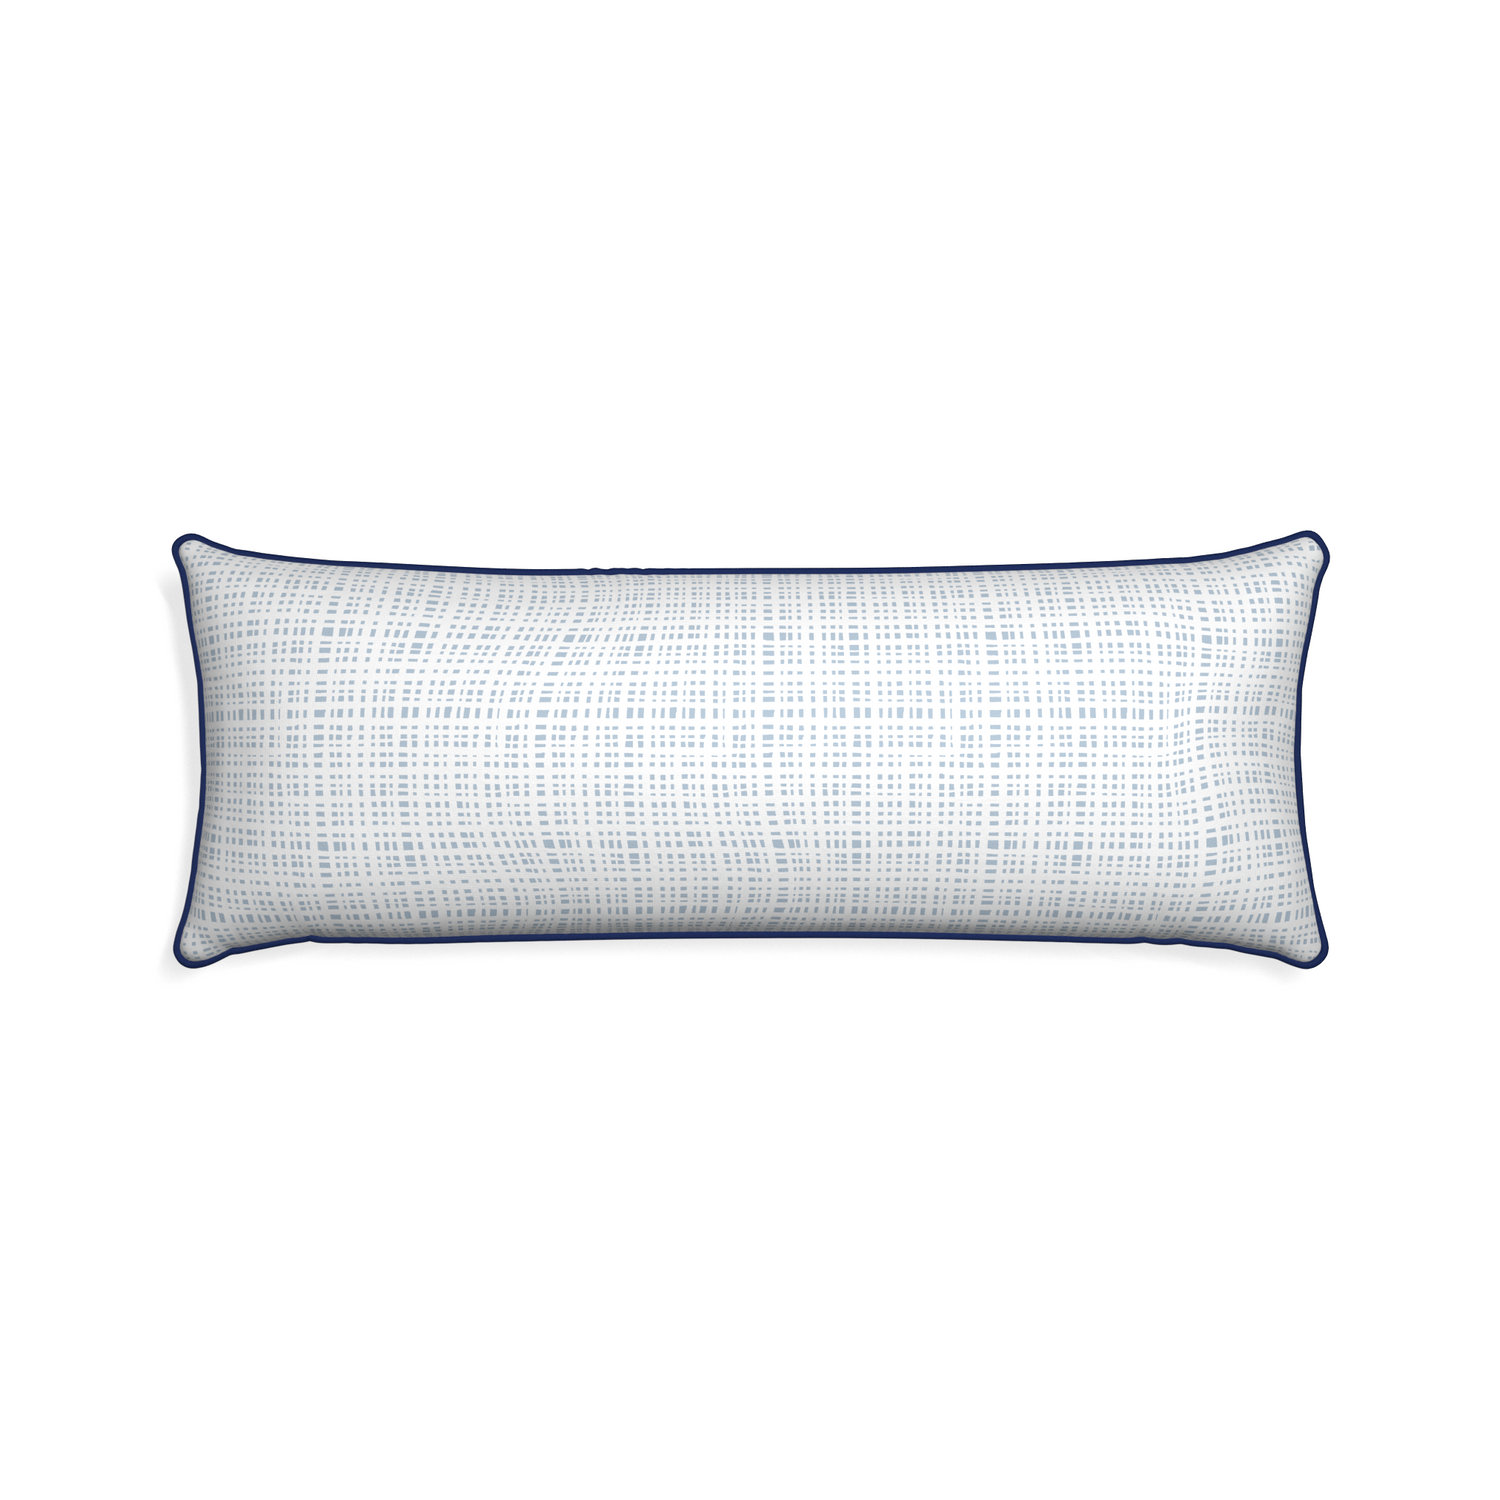 Xl-lumbar ginger custom plaid sky bluepillow with midnight piping on white background